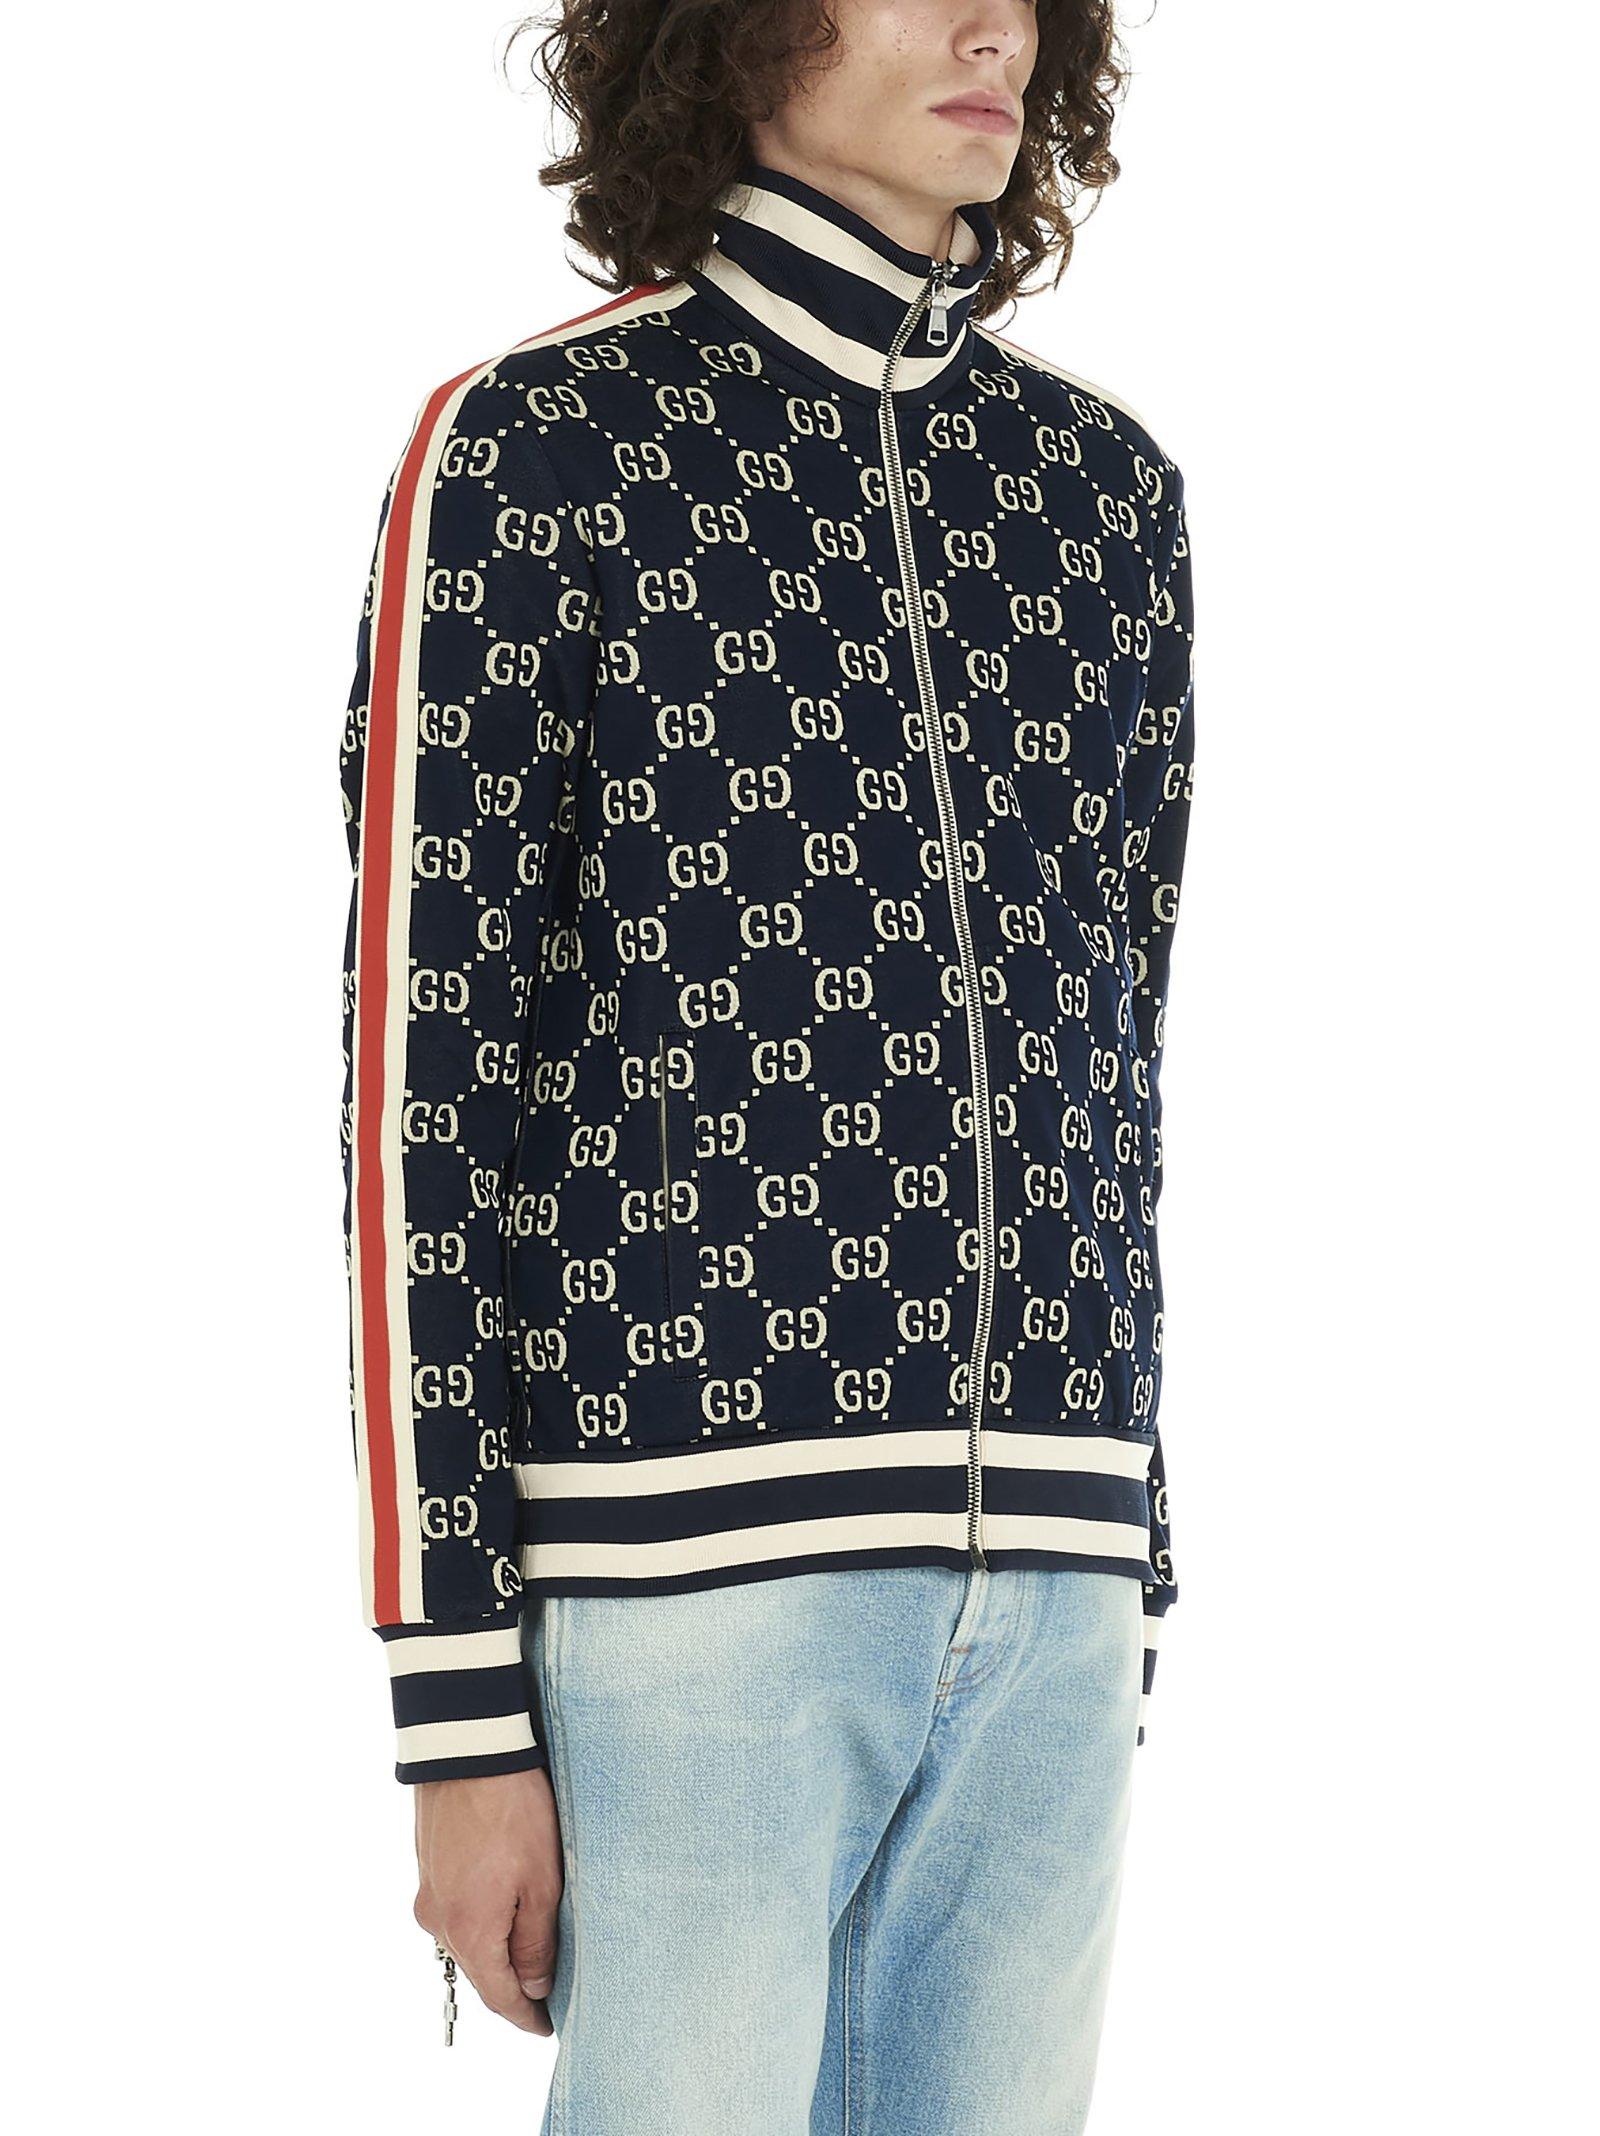 Gucci GG Jacquard Cotton Jacket in Navy (Blue) for Men - Save 50% - Lyst